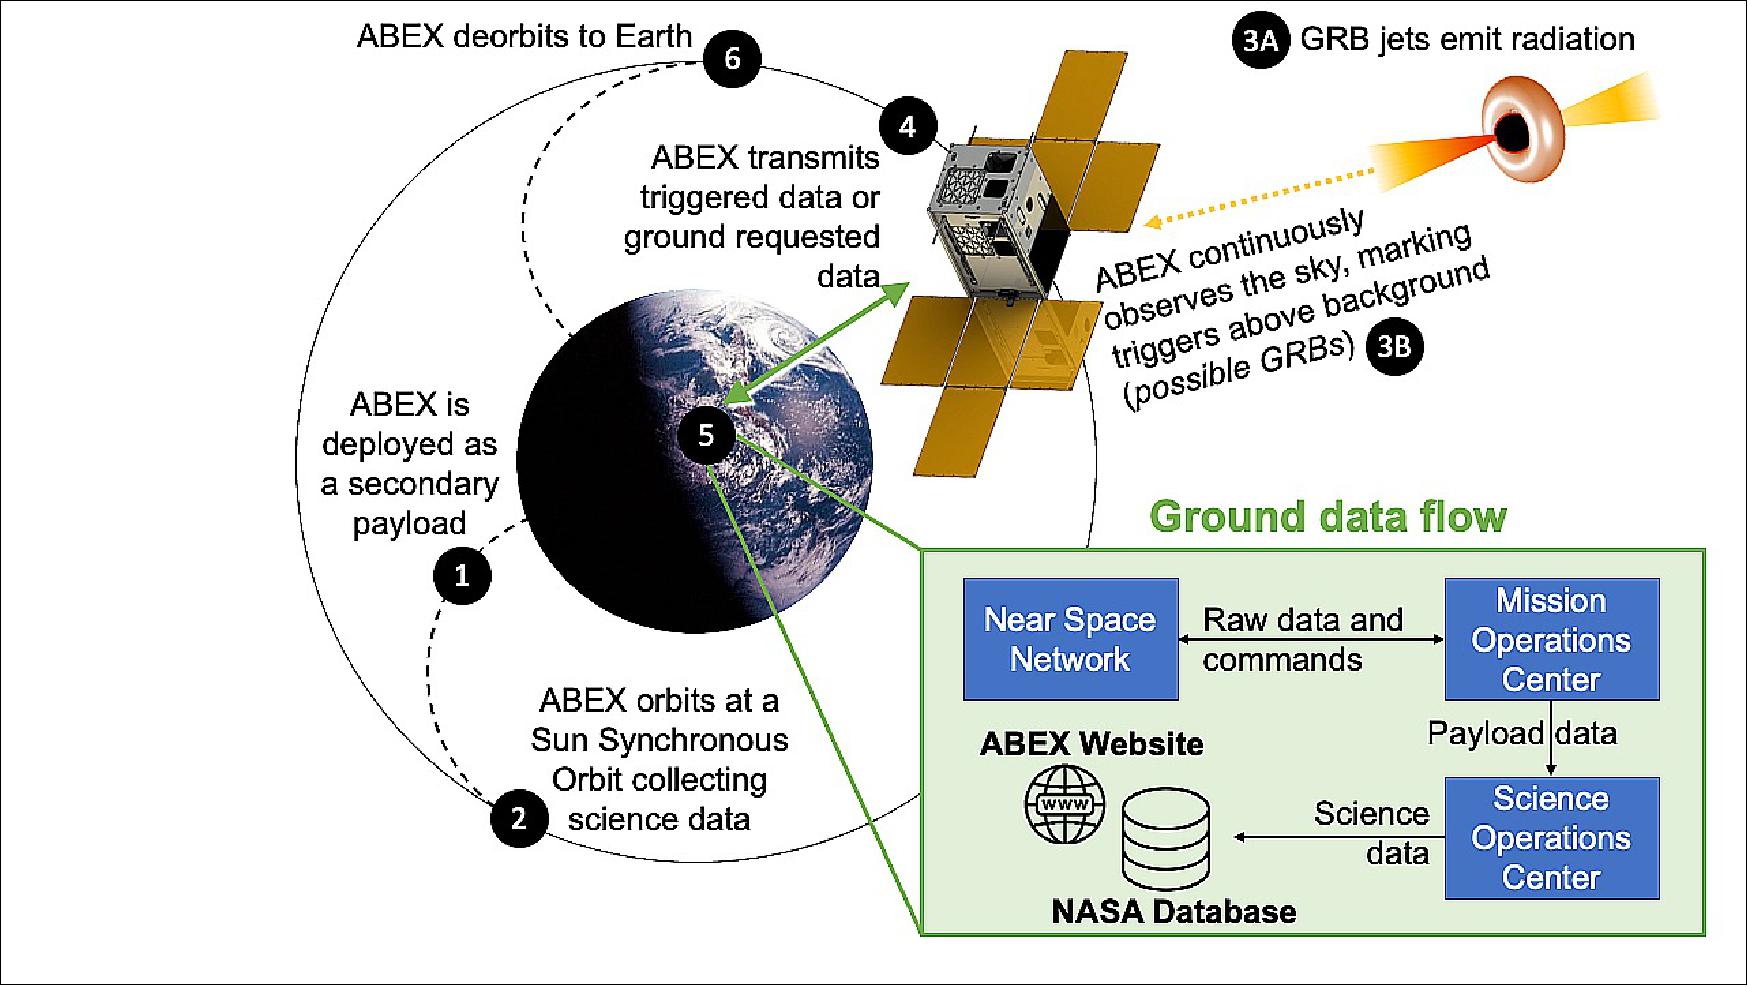 Figure 6: Overview of the ABEX mission (image credit: ABEX team)